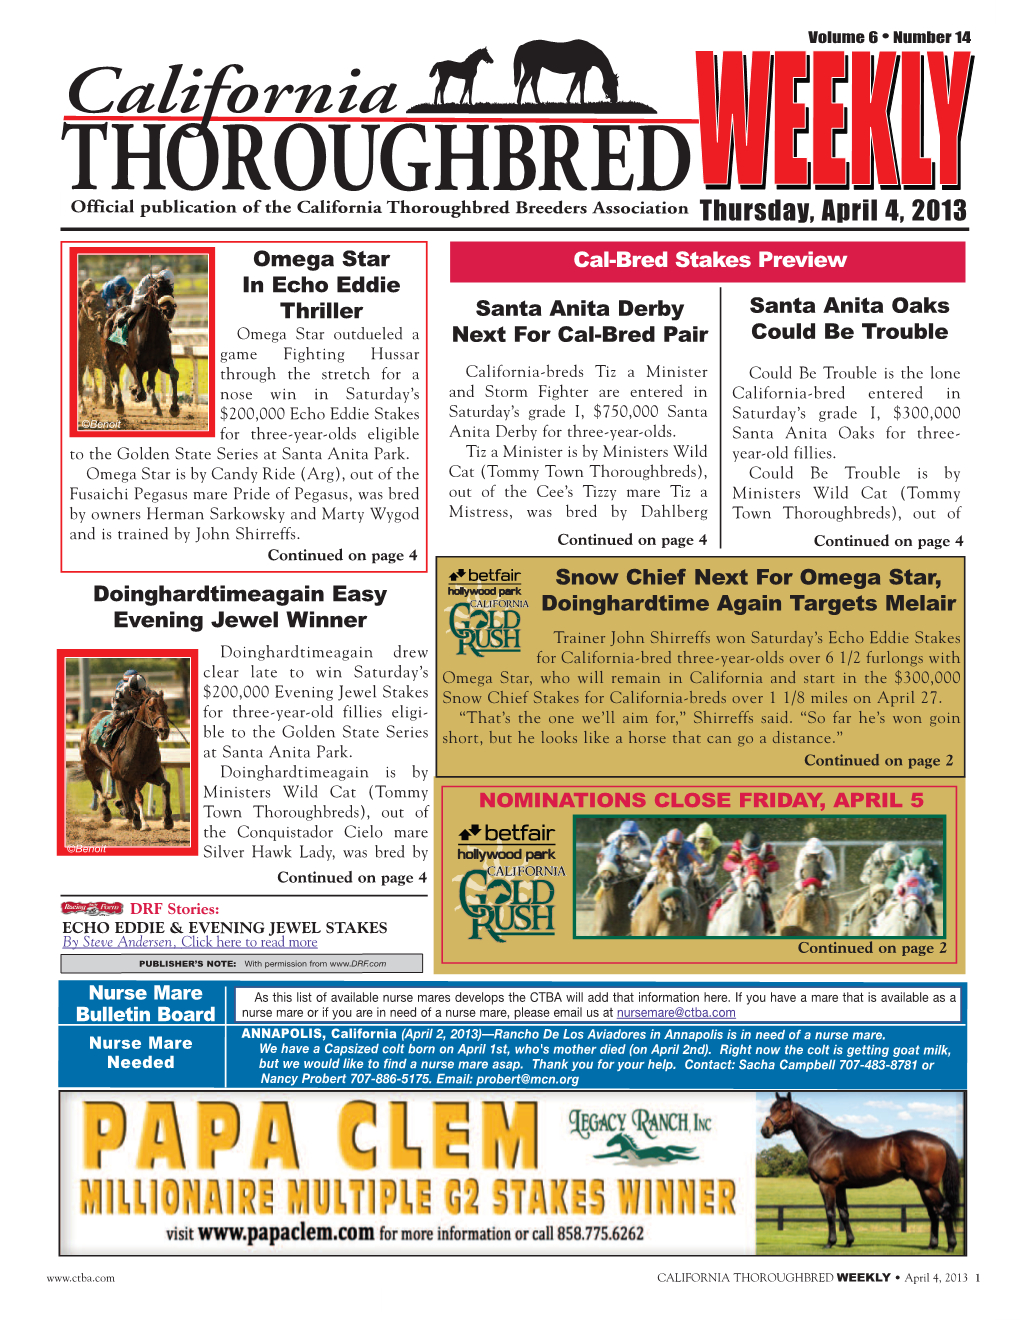 Thursday, April 4, 2013 the California Thoroughbred Breeders Association (CTBA), Has Now Been